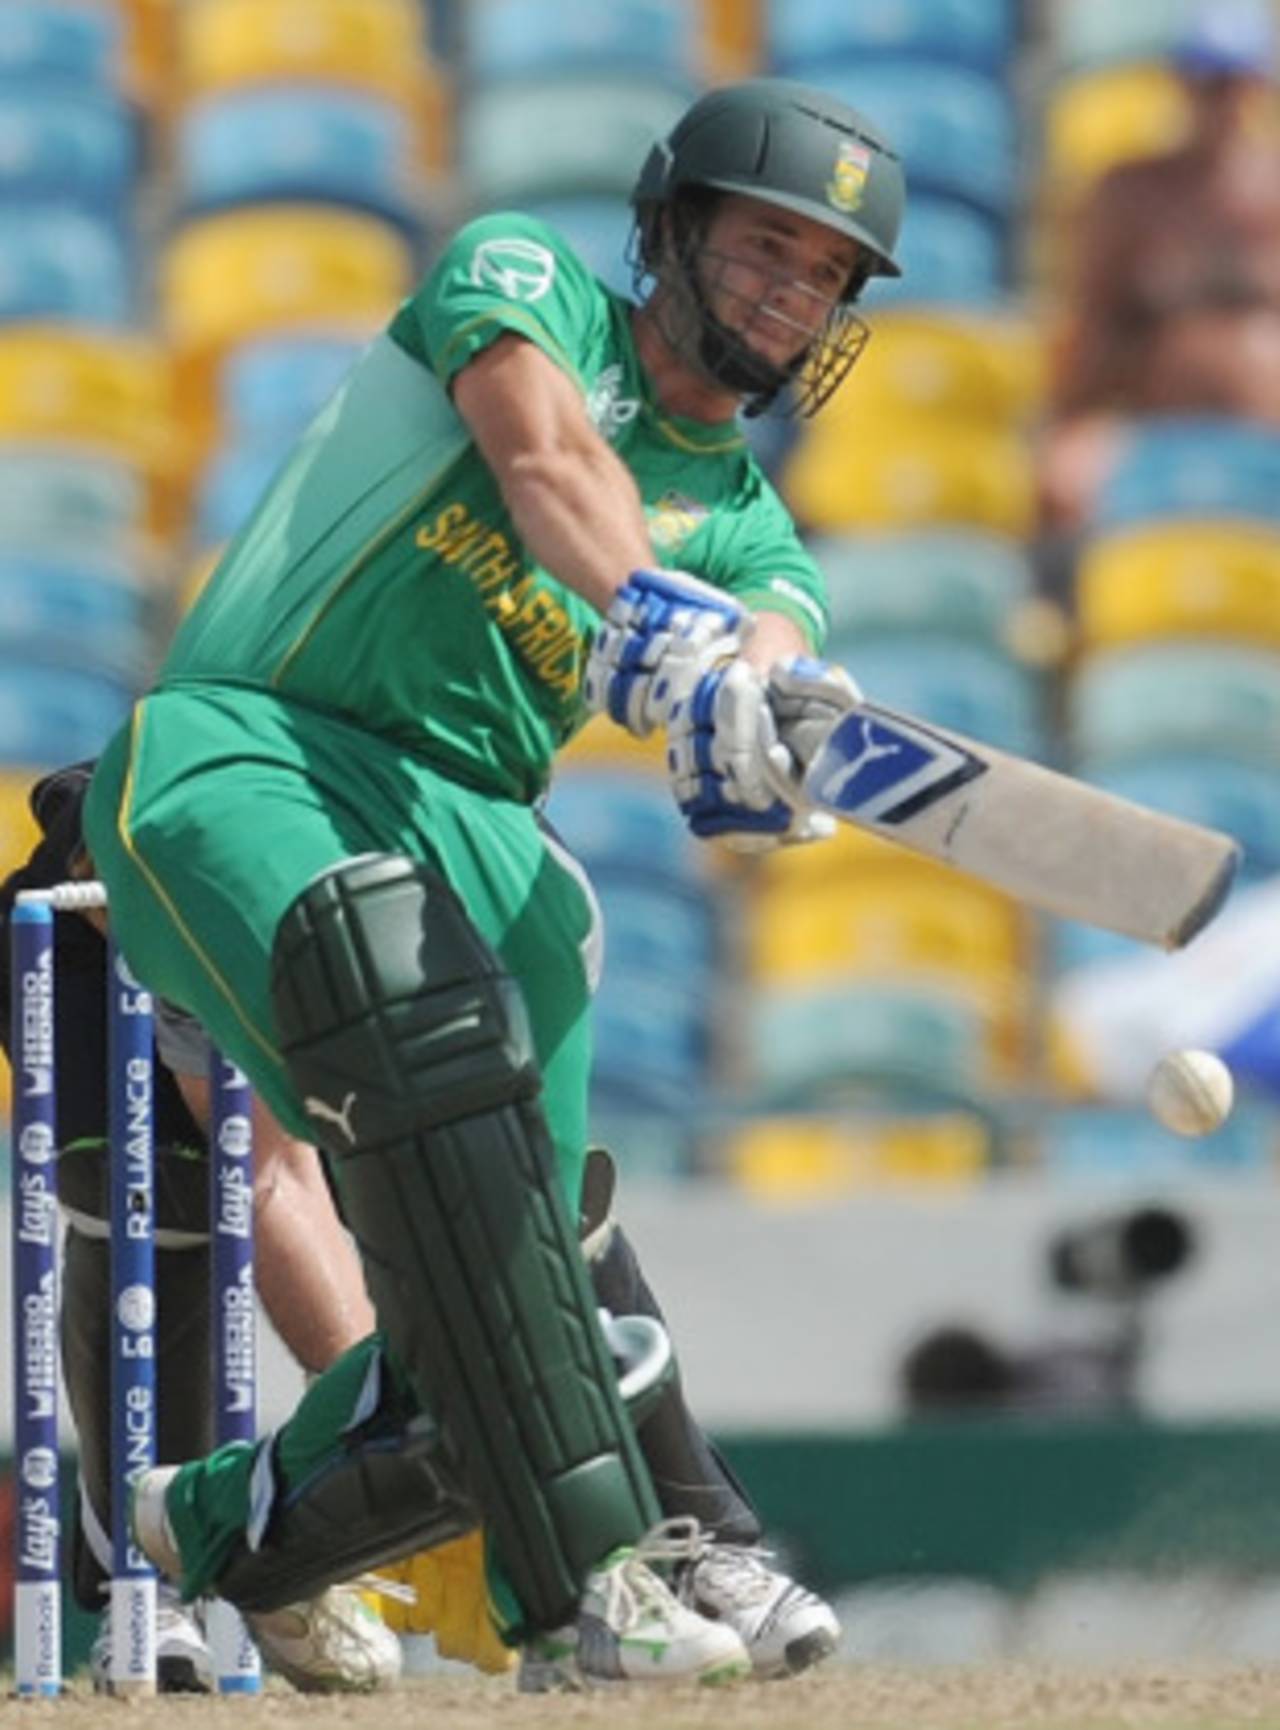 Albie Morkel looks to clear the ropes, New Zealand v South Africa, Group E, Bridgetown, May 6, 2010

